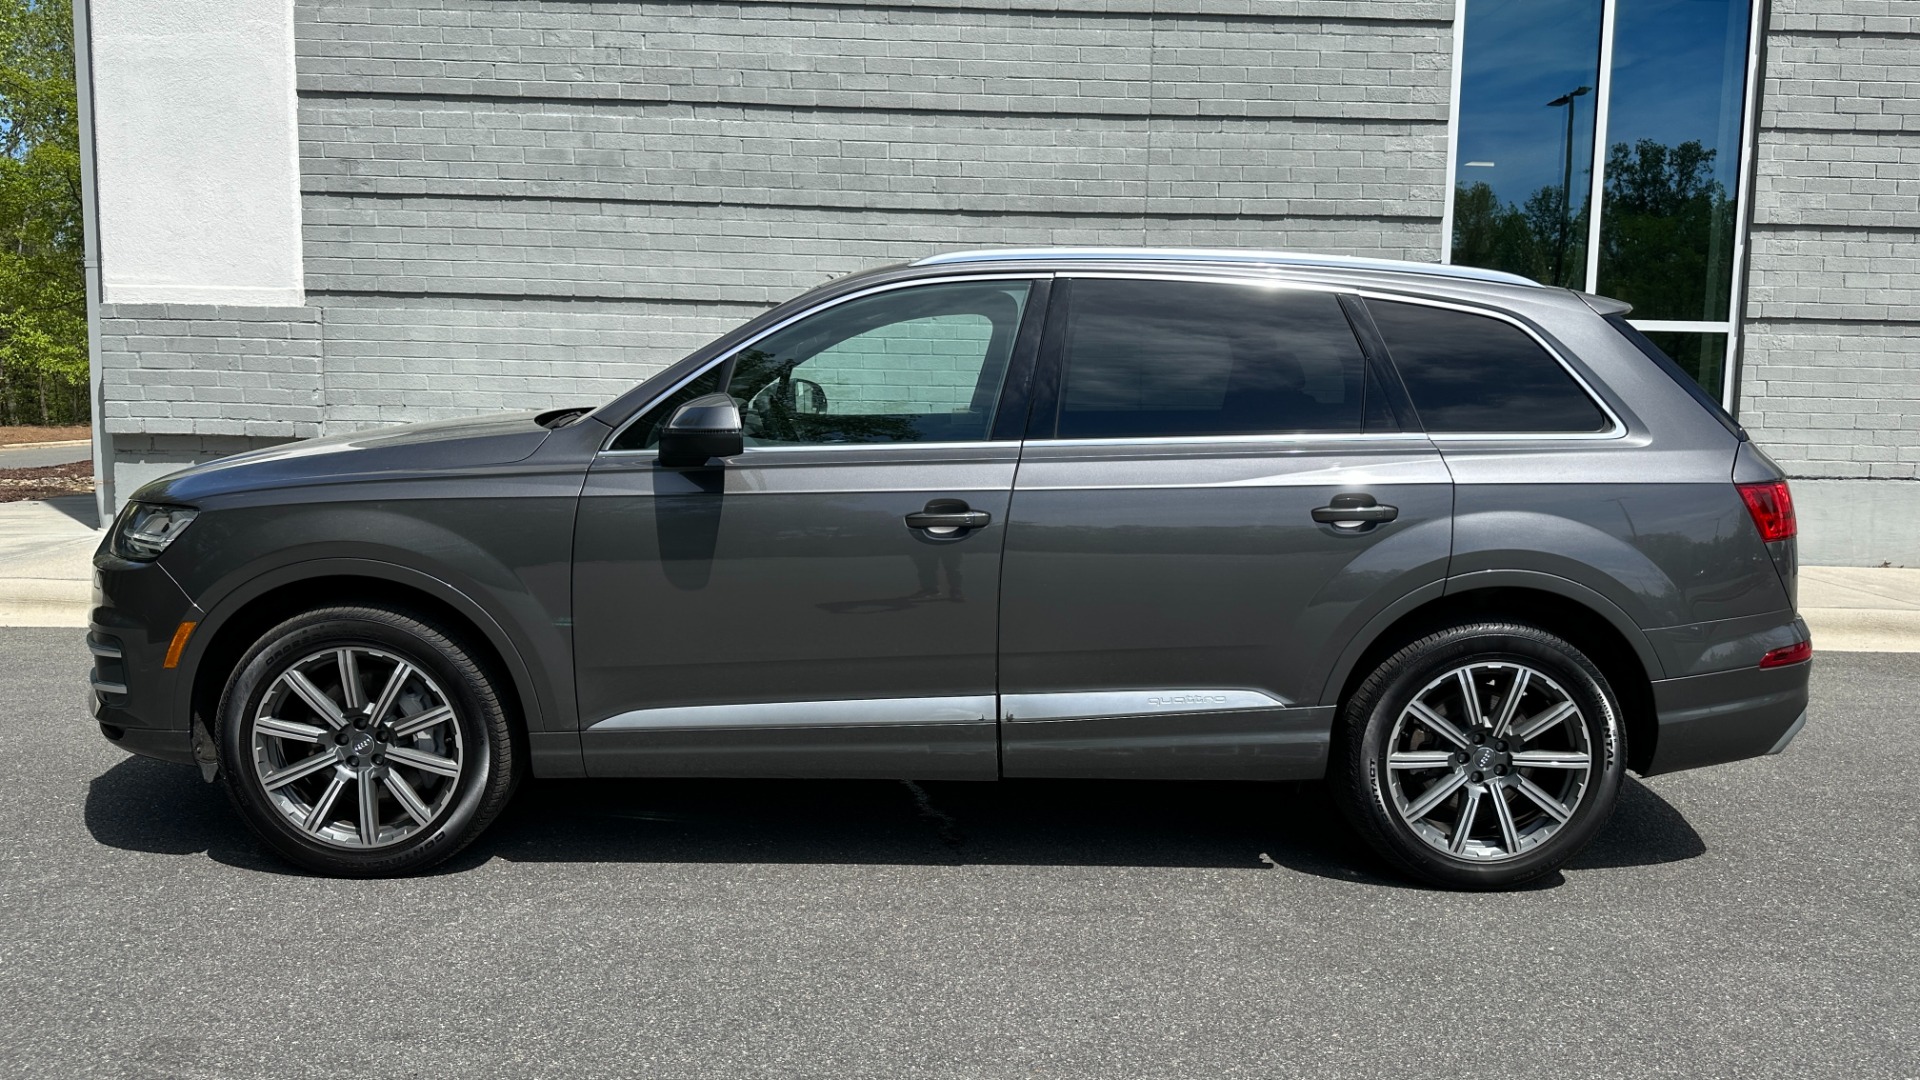 Used 2019 Audi Q7 PREMIUM PLUS / COLD WEATHER PACKAGE / LEATHER / SUNSHADES / NAV for sale Sold at Formula Imports in Charlotte NC 28227 3